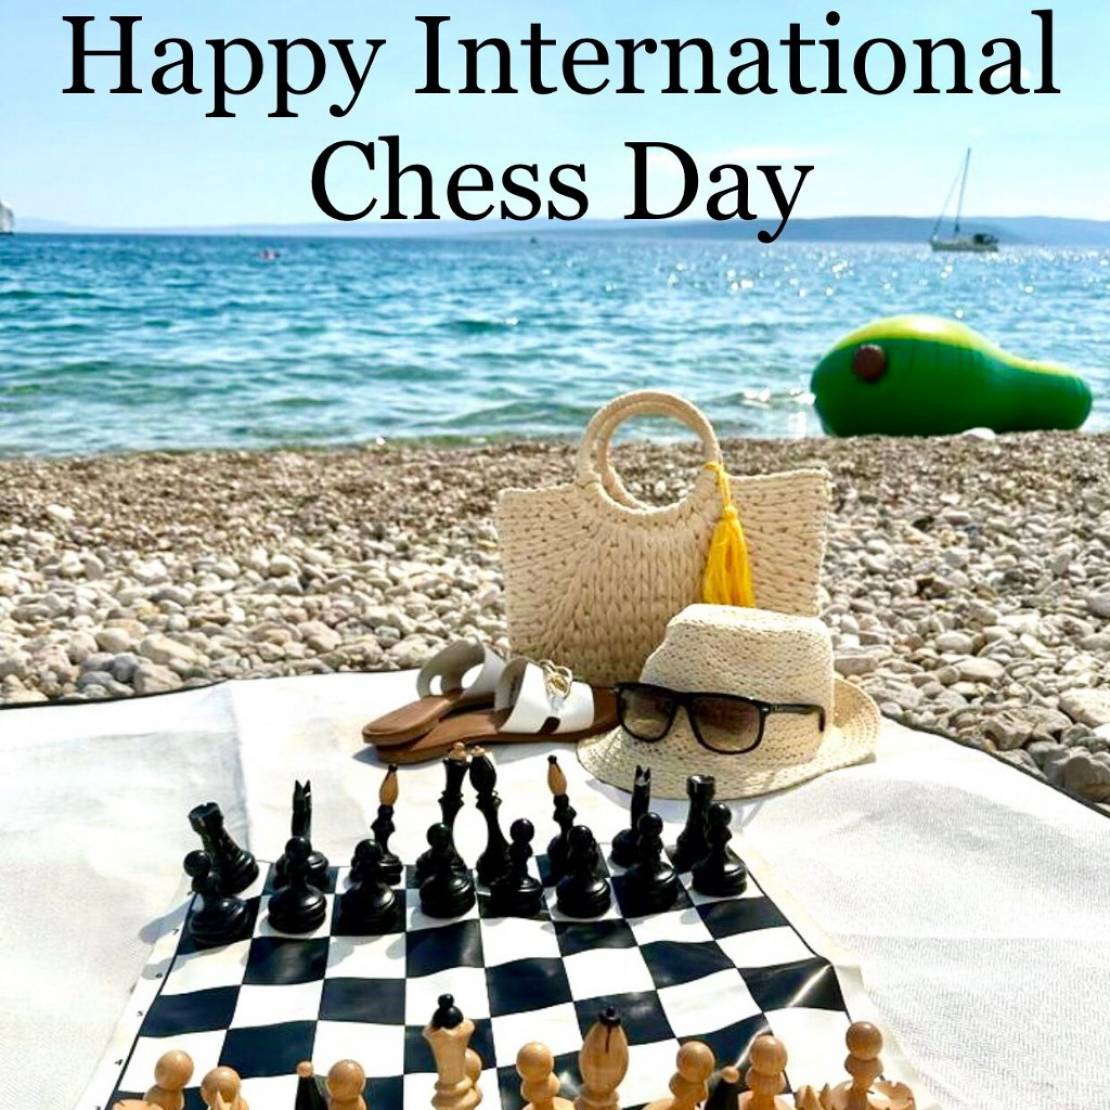 Today we celebrate International Chess Day. Why this is perfect timing to bring your kids